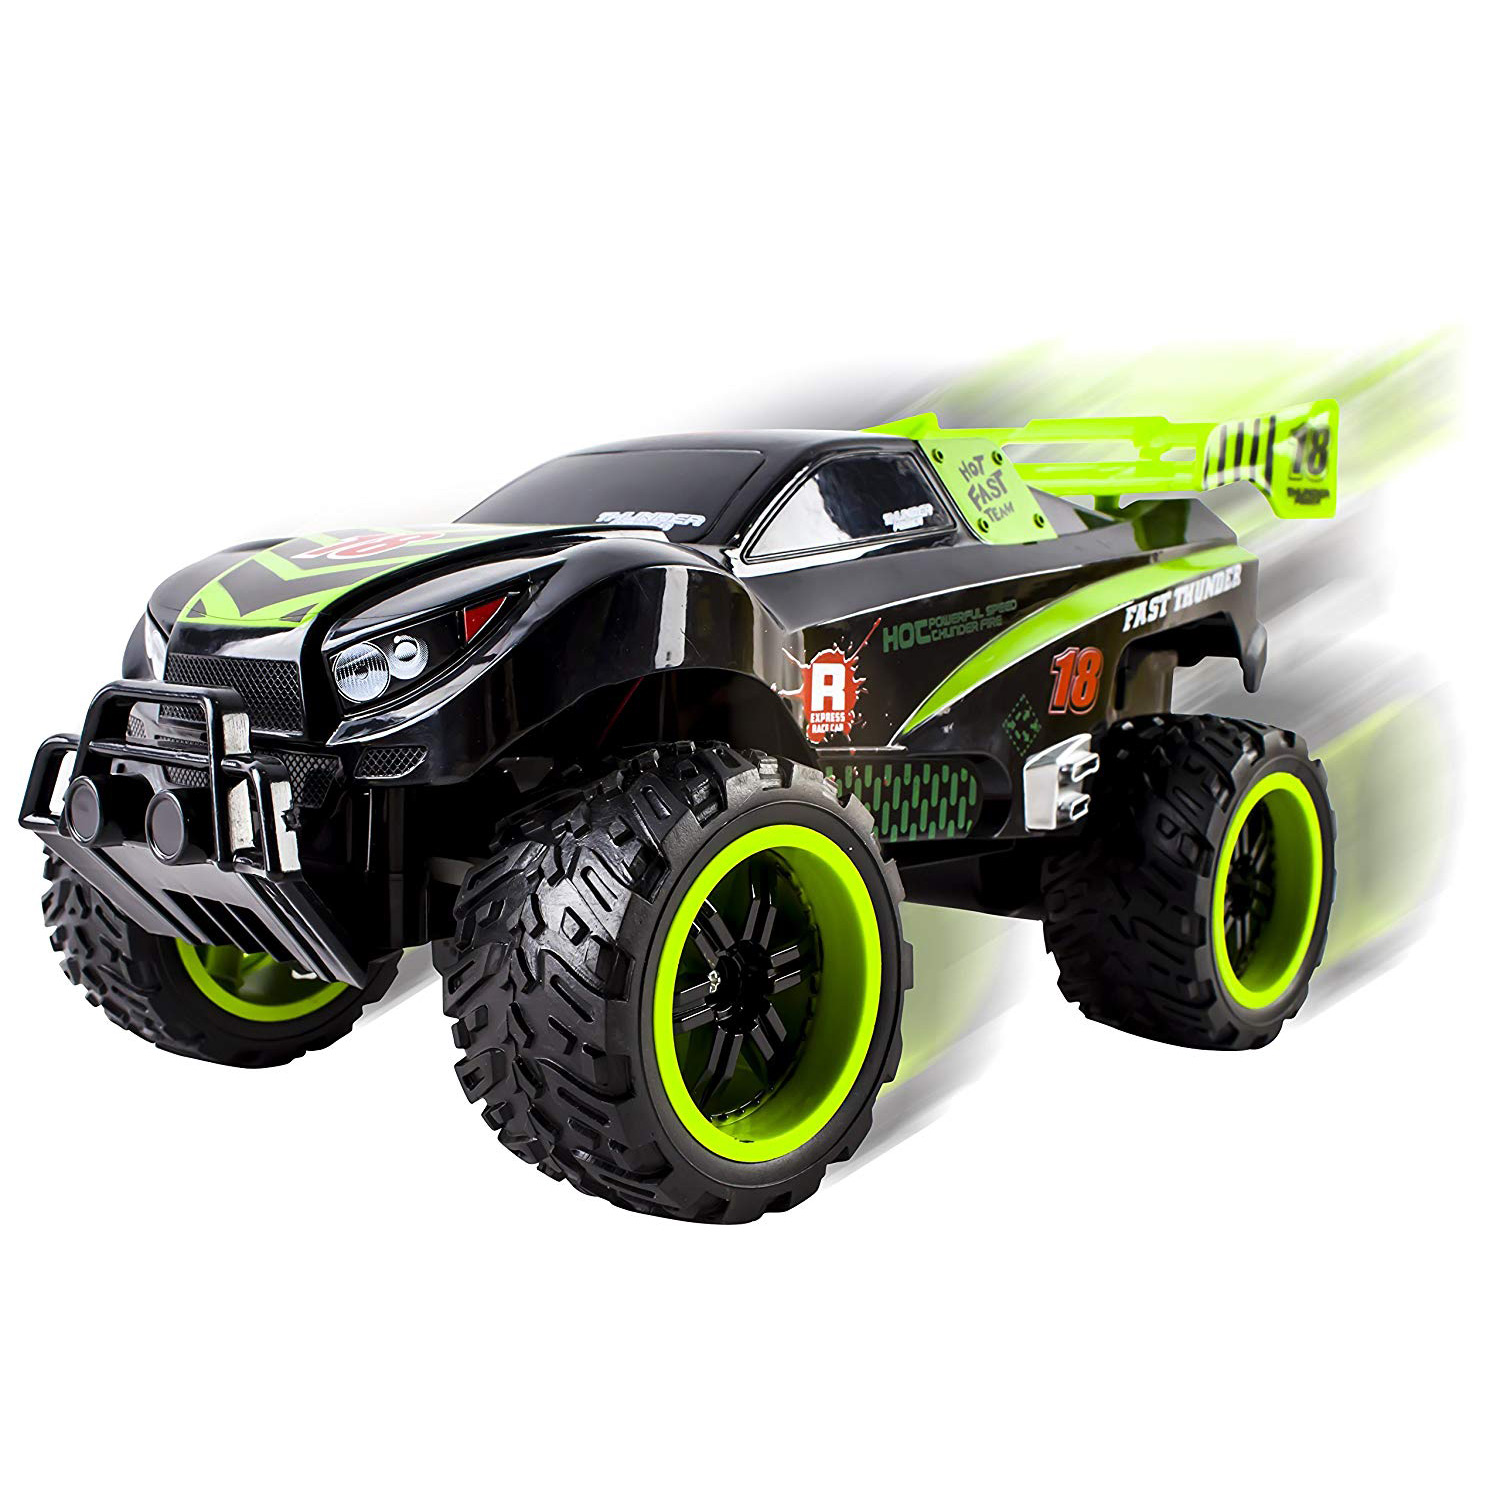 Thunder Big Wheel RC Truck With Light Up Wheels Remote Control Truggy Car Ready to Run INCLUDES RECHARGEABLE BATTERY 1:16 Size Off-Road Buggy Toy (Green)